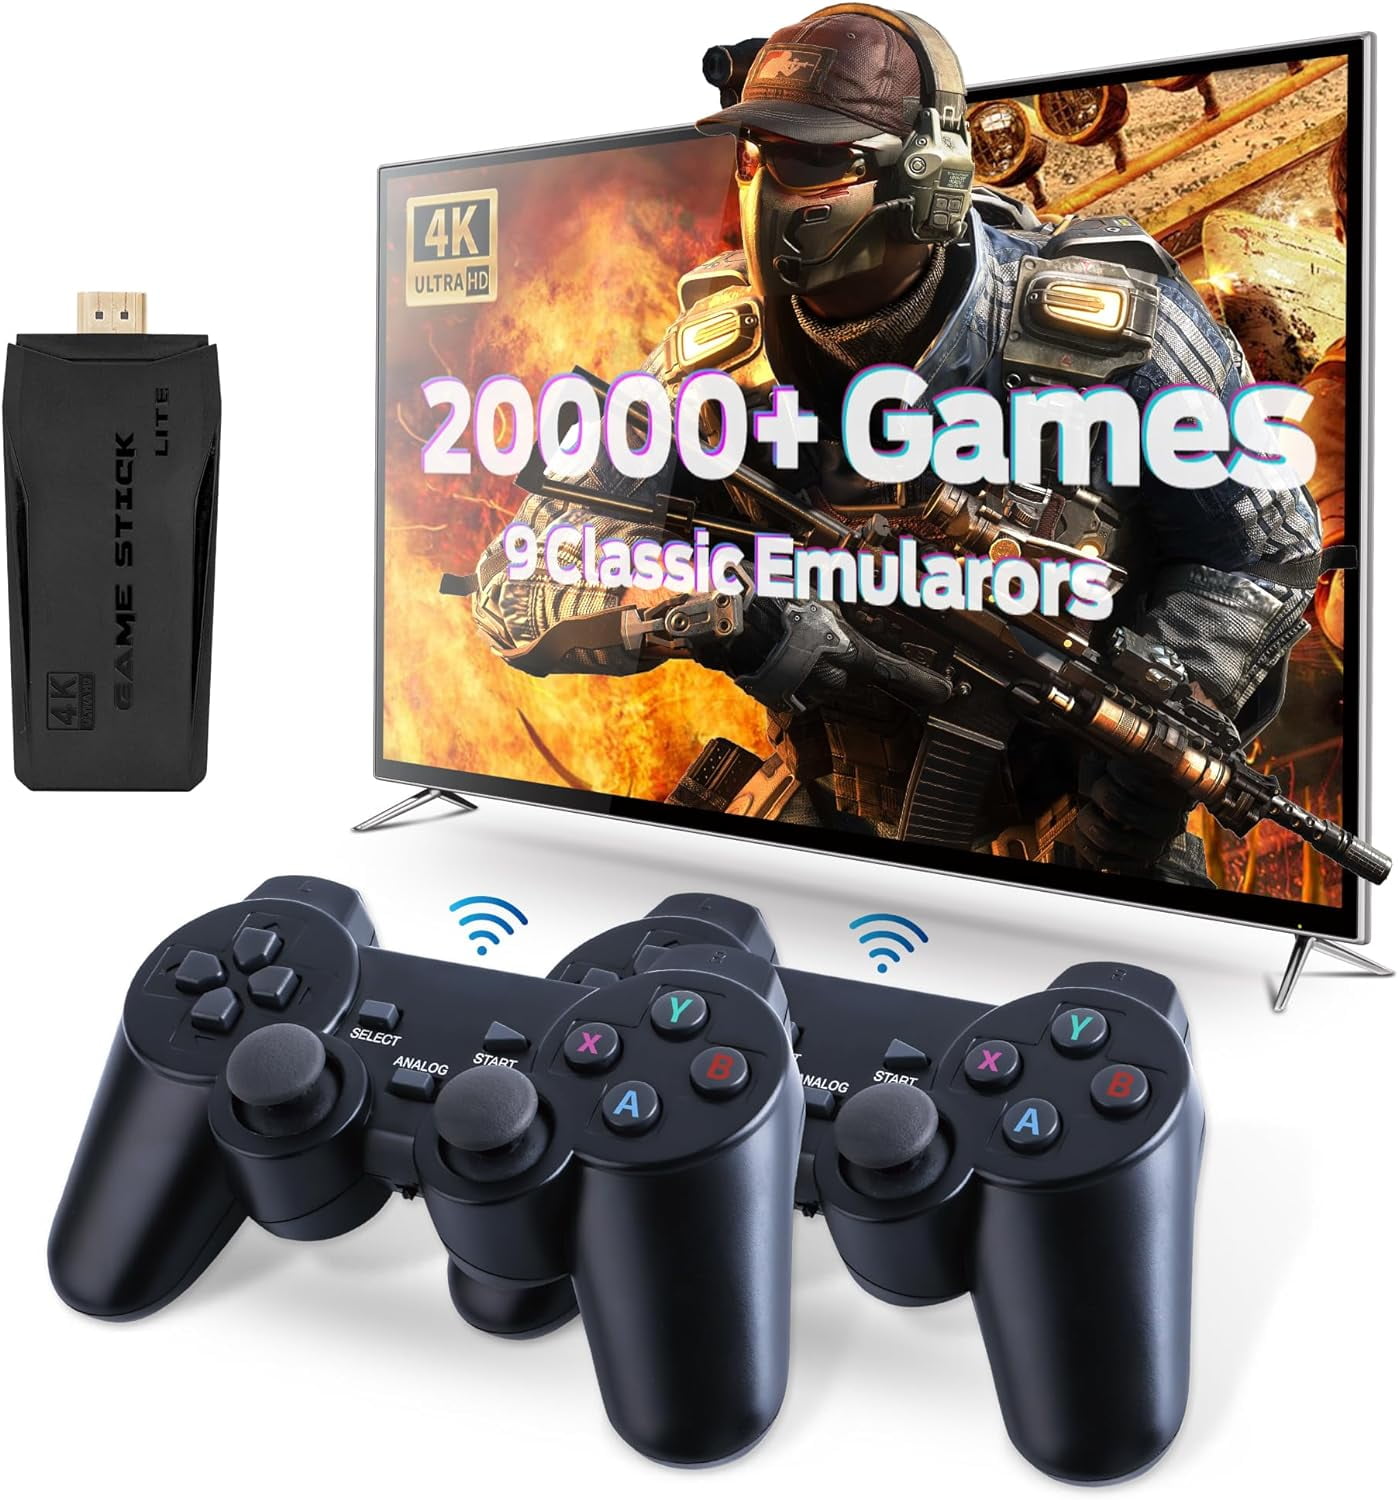 M16 Game Stick, 4K HDMI TV 64G Mini Retro Handheld Gaming Console with  20,000 Games, Wireless Dual Gamepad，Arcade Game Console Plug and Play Video